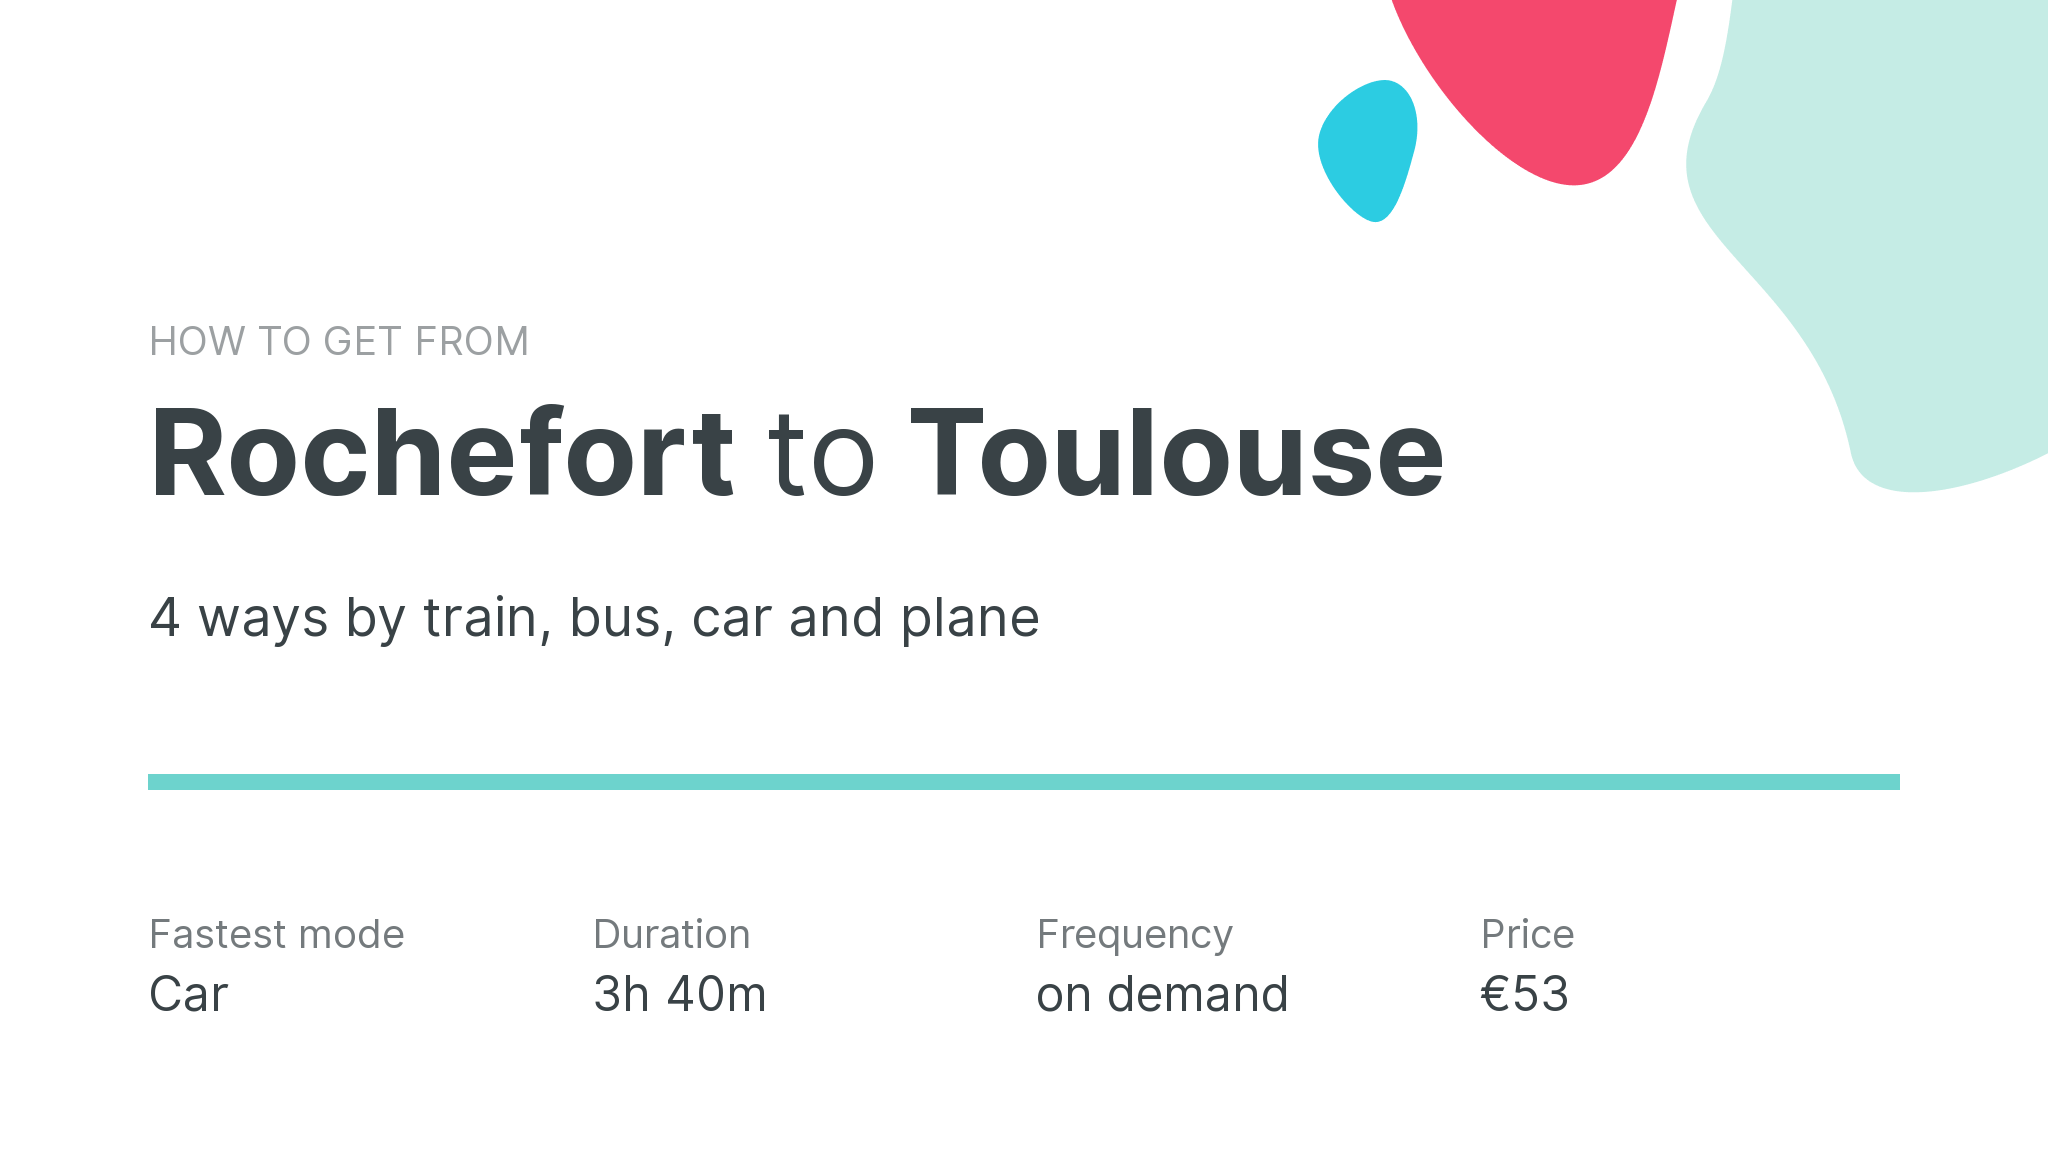 How do I get from Rochefort to Toulouse